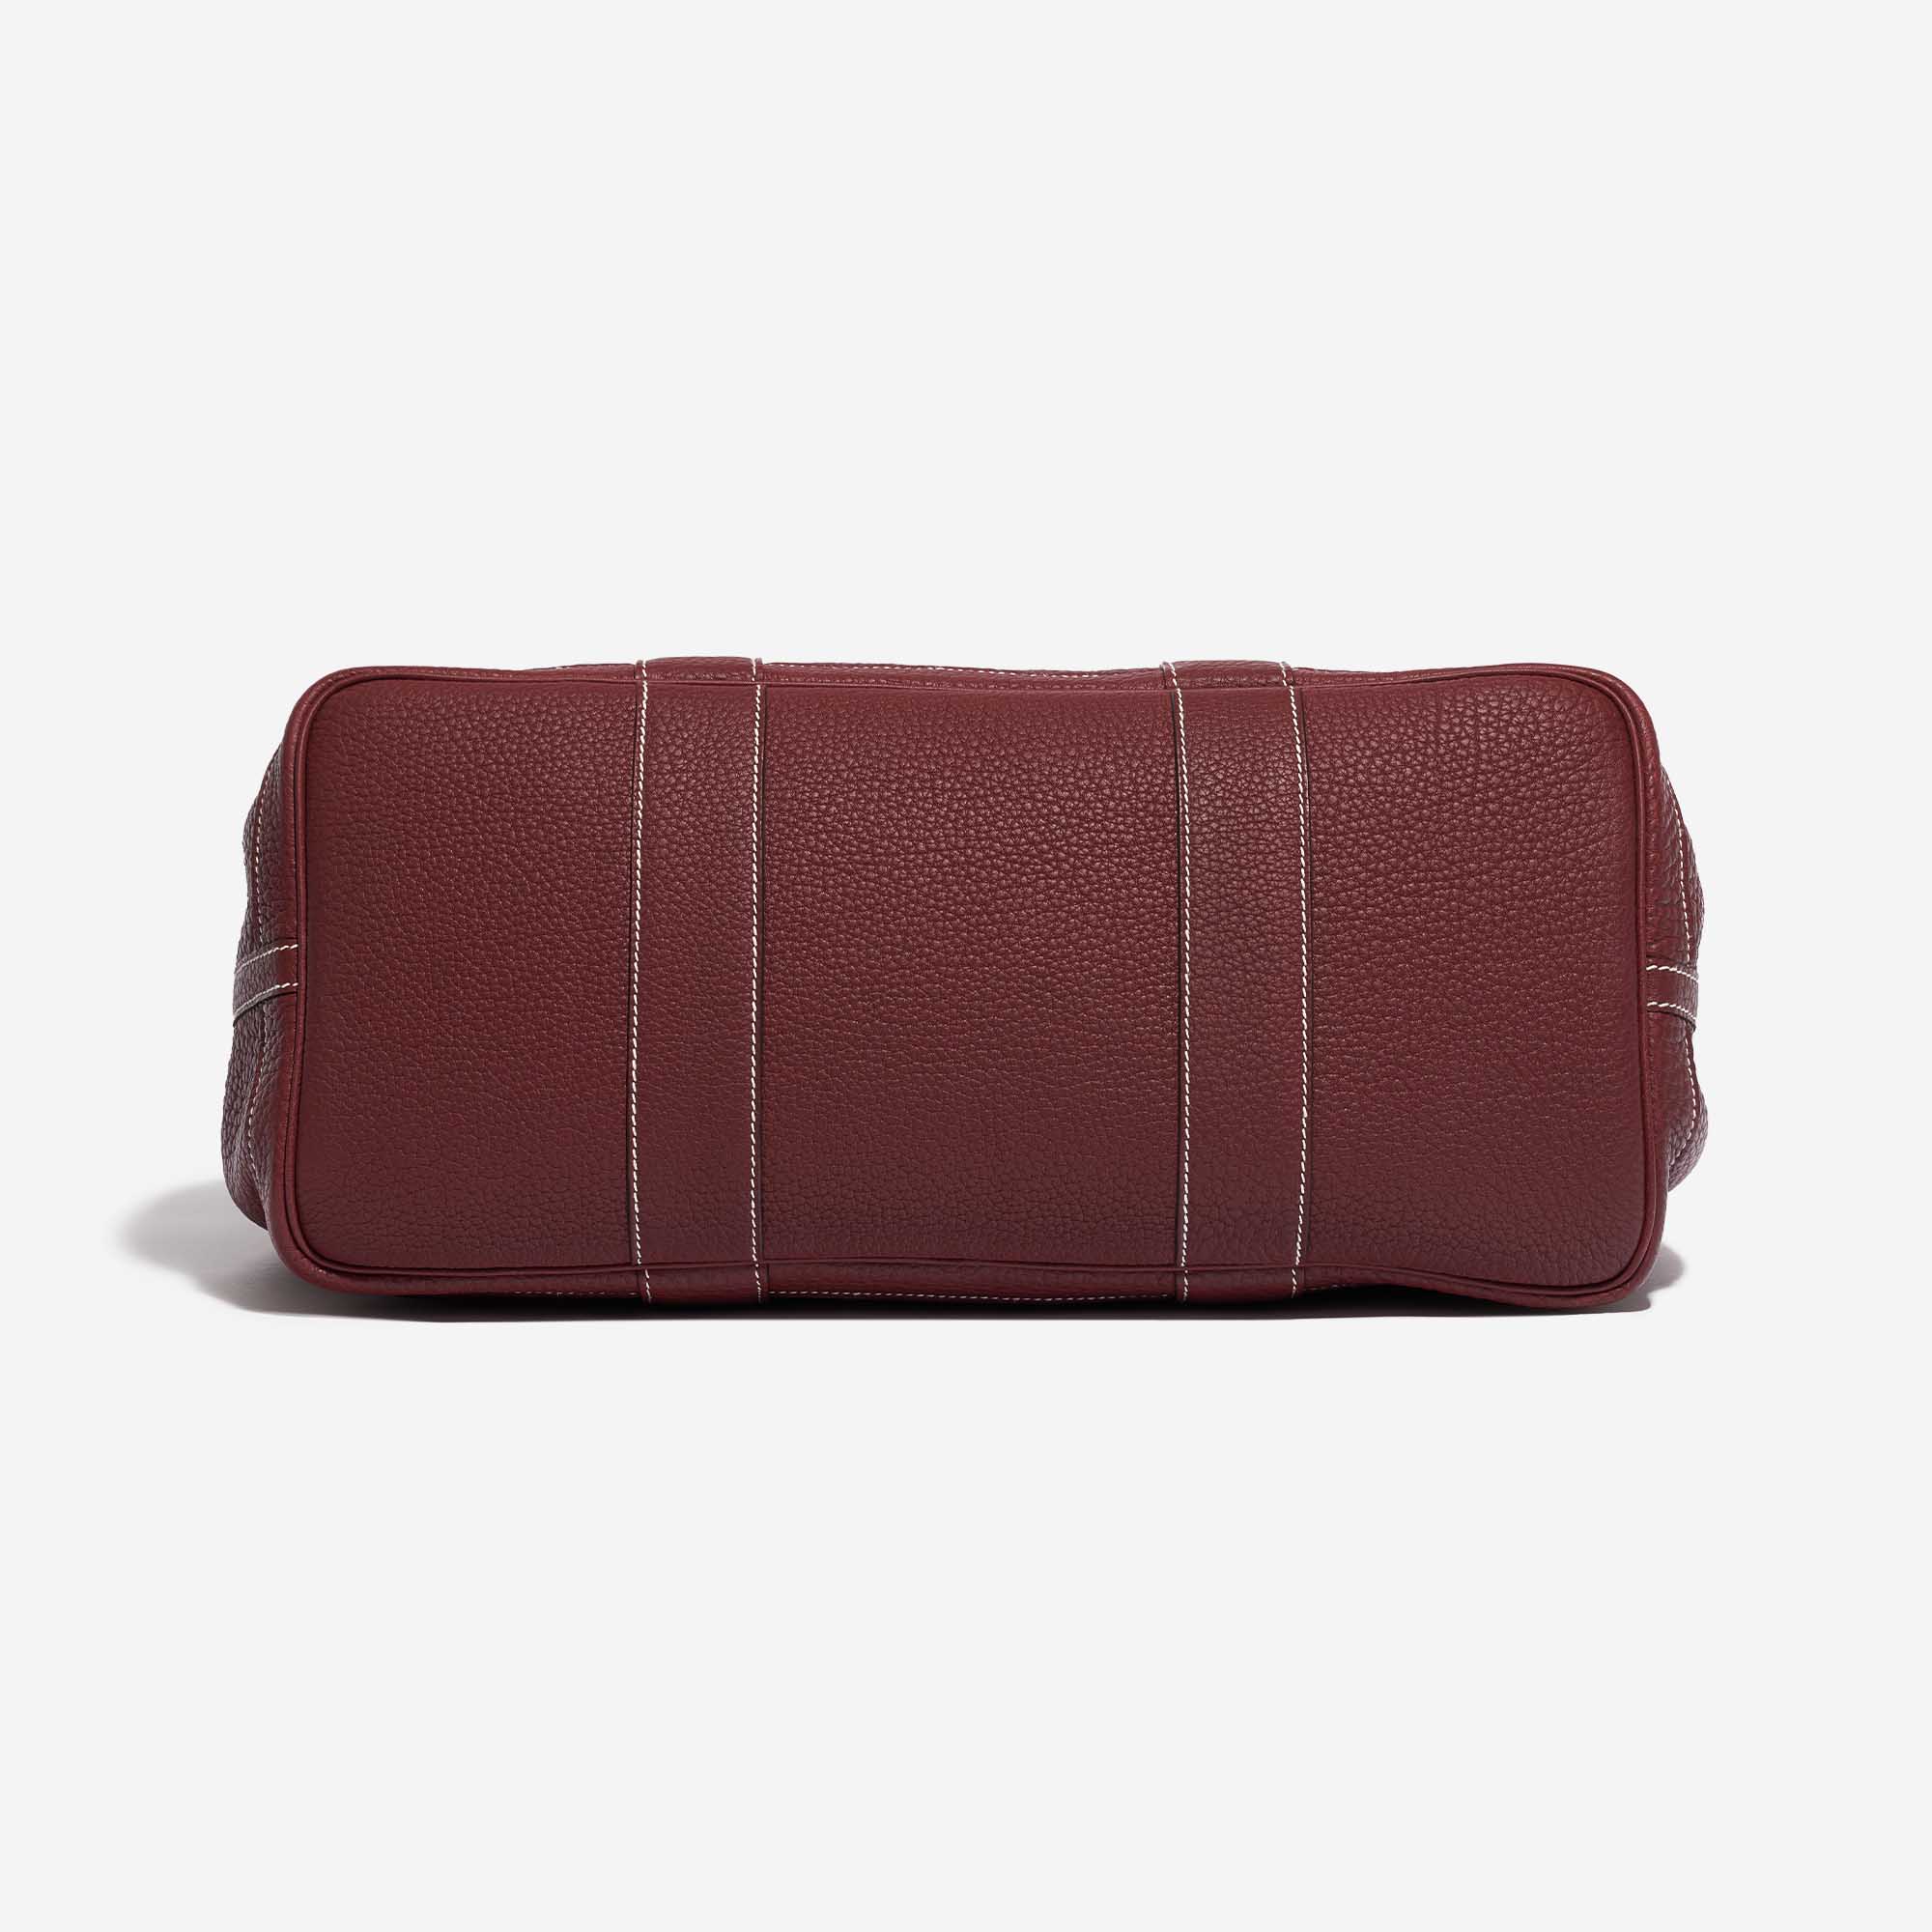 [RARE] Hermès Garden Party Pockets 36 Rouge Tomato with Shoulder Strap